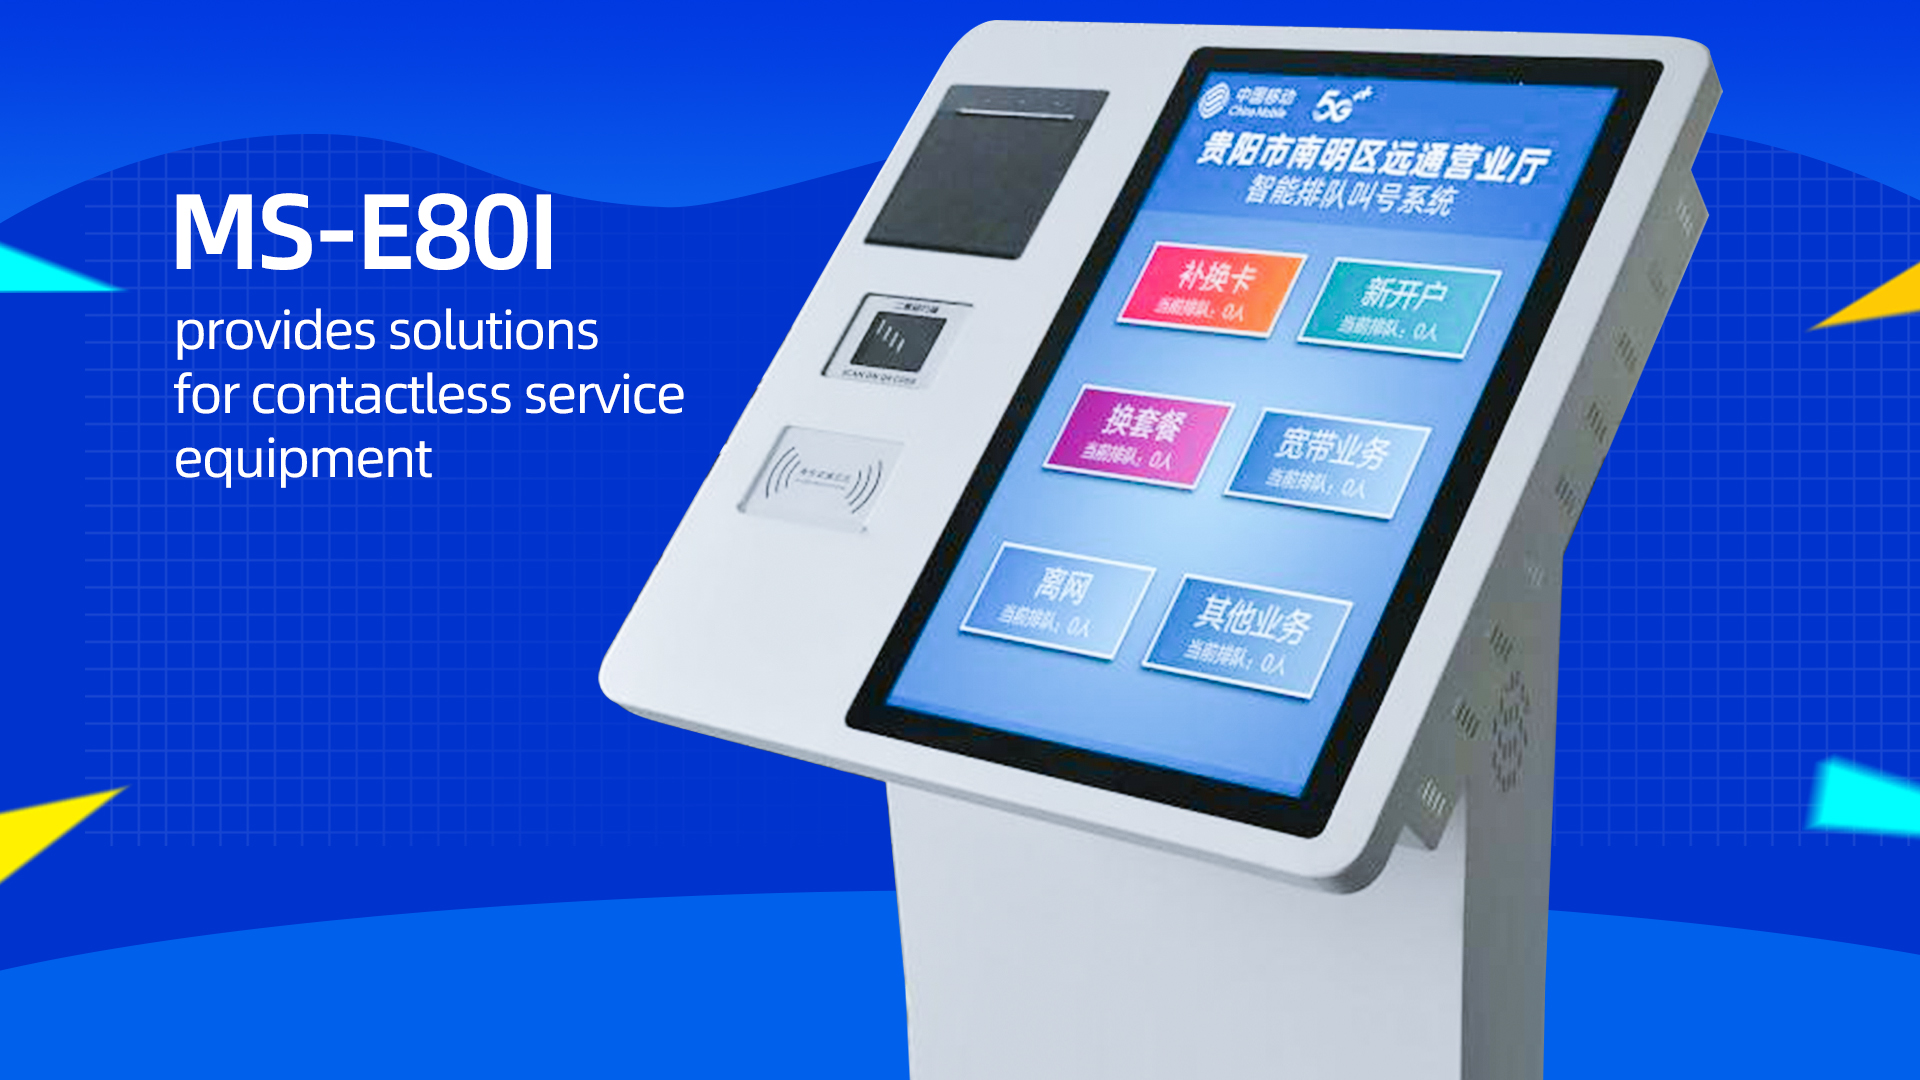 Masung printer MS-E80I provides solutions for contactless service equipment